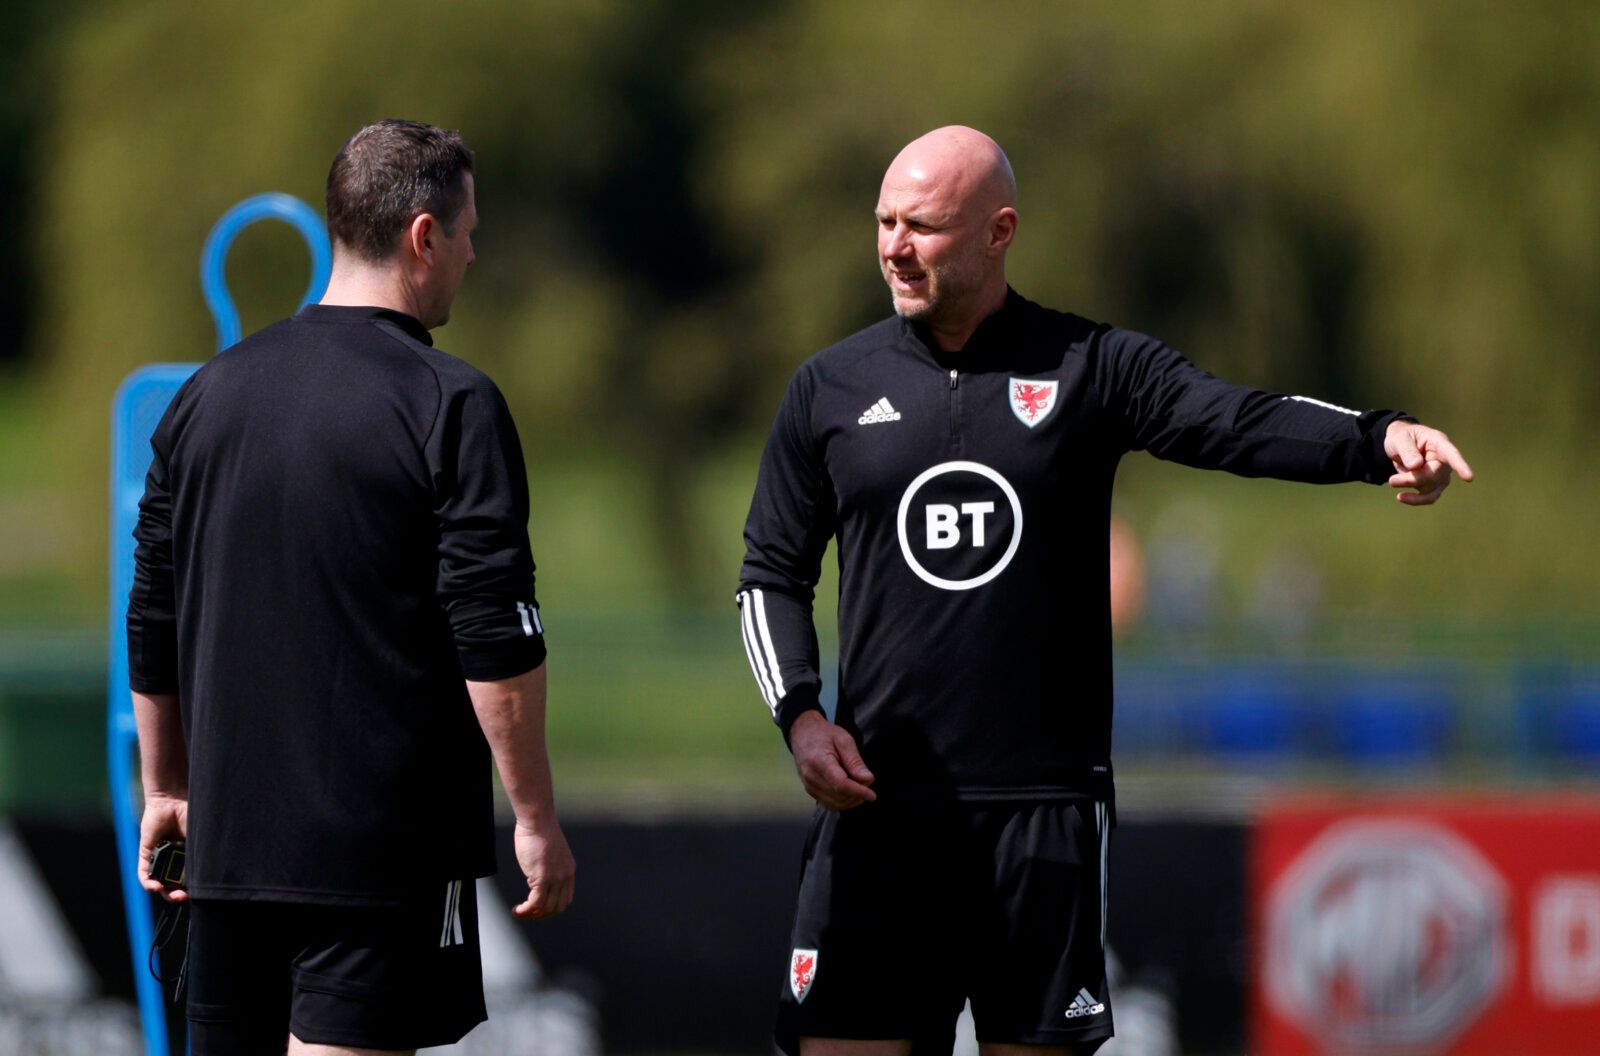 Soccer Football - Wales Training - Vale Resort, Hensol, Wales, Britain - June 4, 2021 Wales caretaker manager Rob Page during training Action Images via Reuters/John Sibley